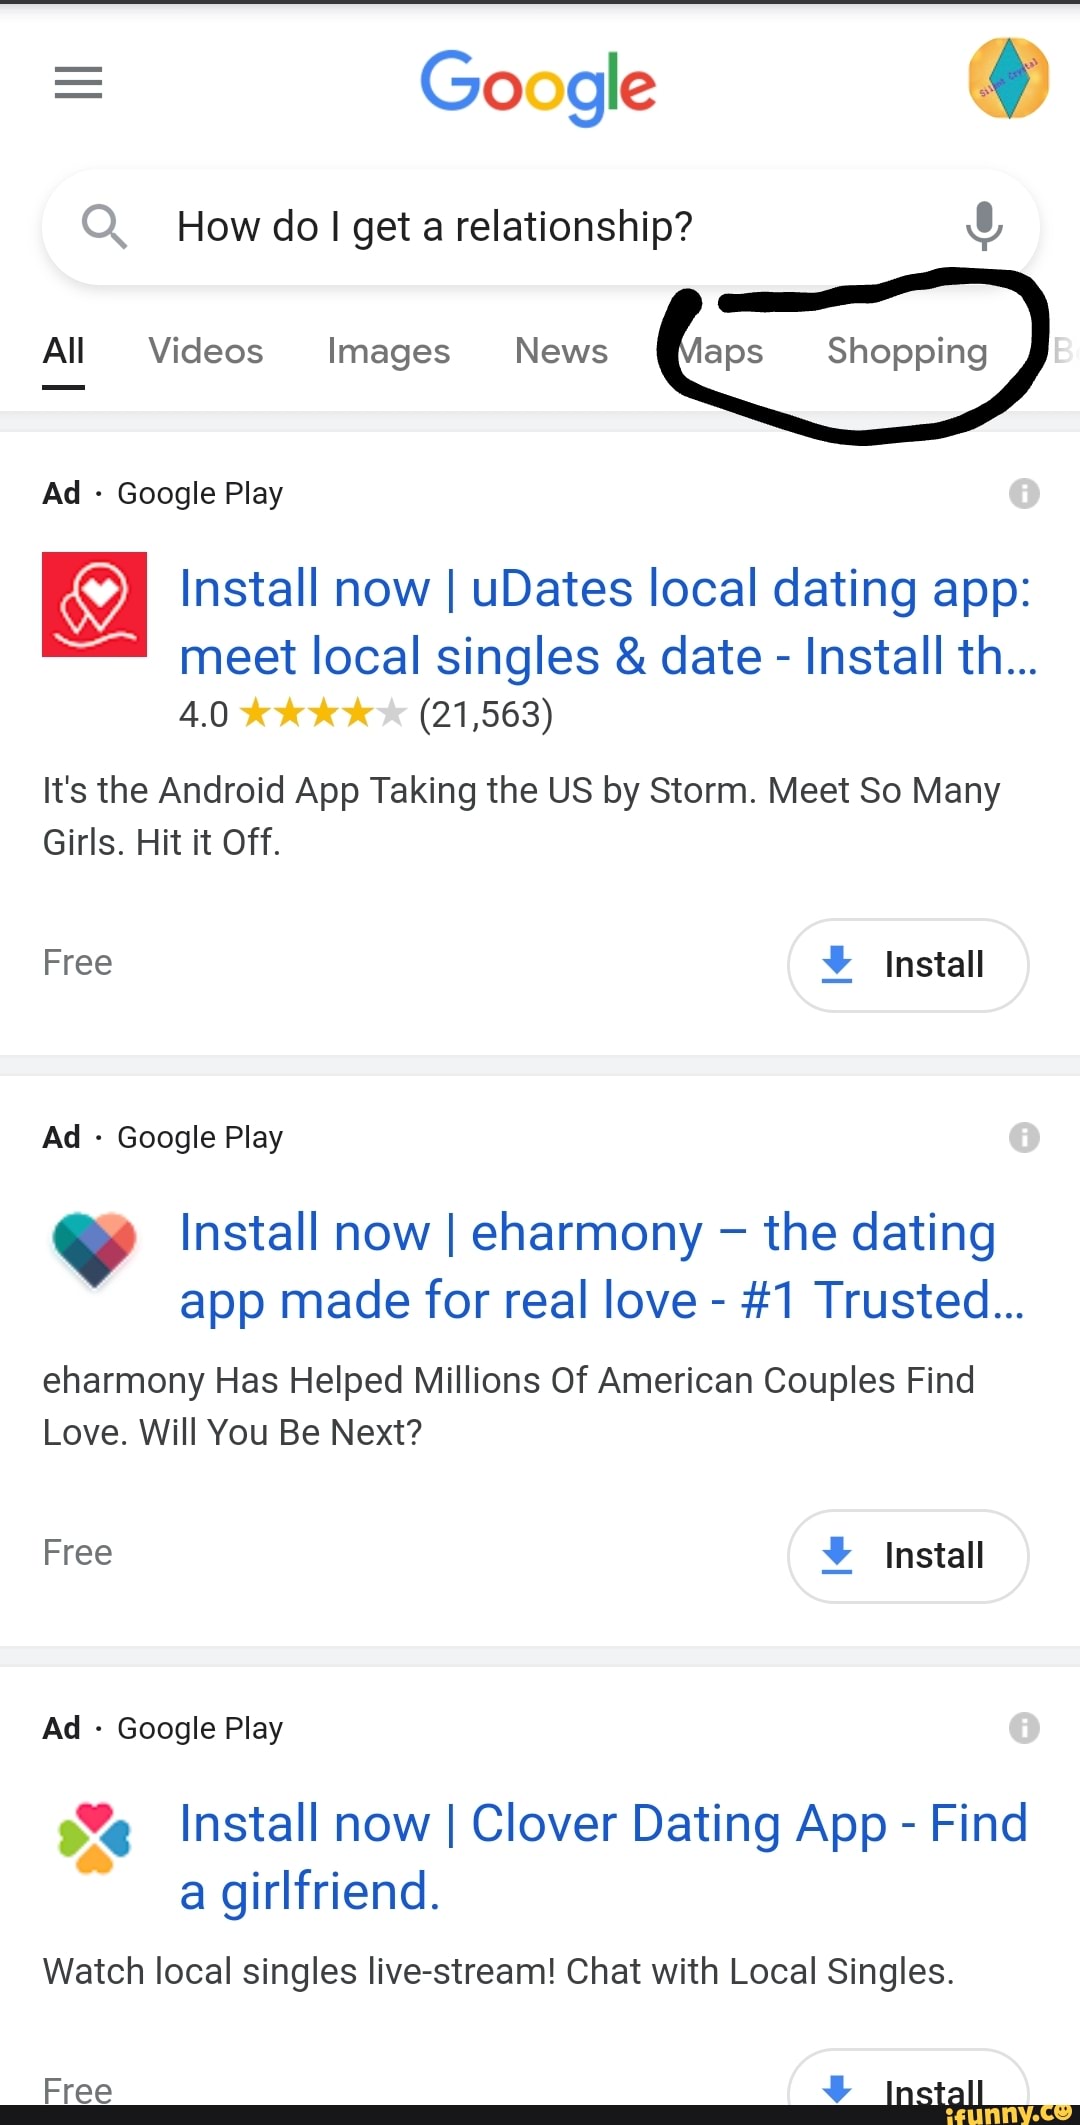 Pure Ruby Local Dating Ad